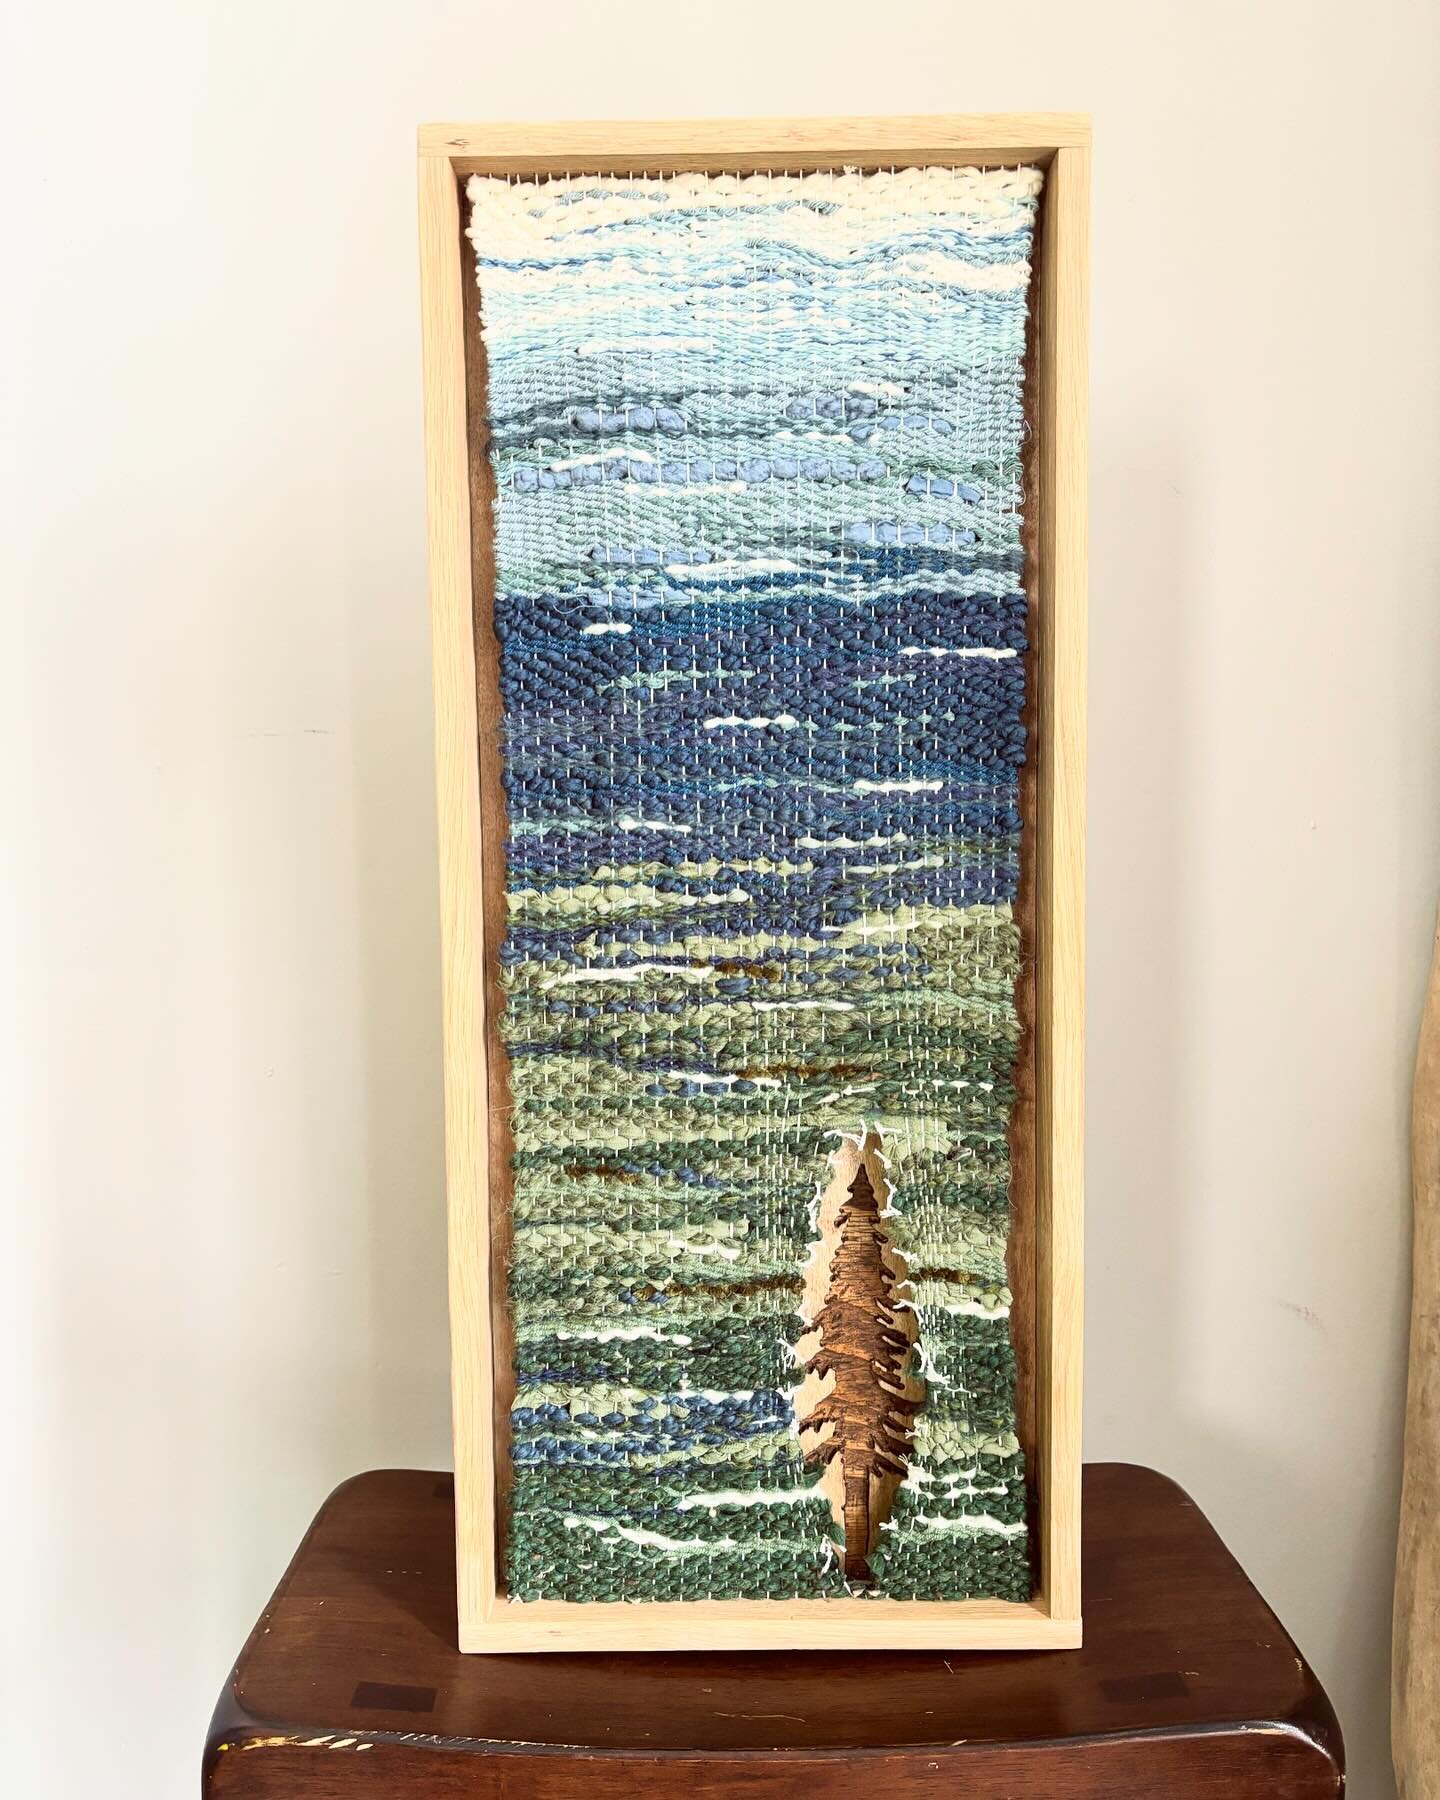 blues &amp; greens &amp; a tree. some of my favorite things 🌲🌲🌲

#3pinesmercantile #weaving #trees #wovenwallart #natureart